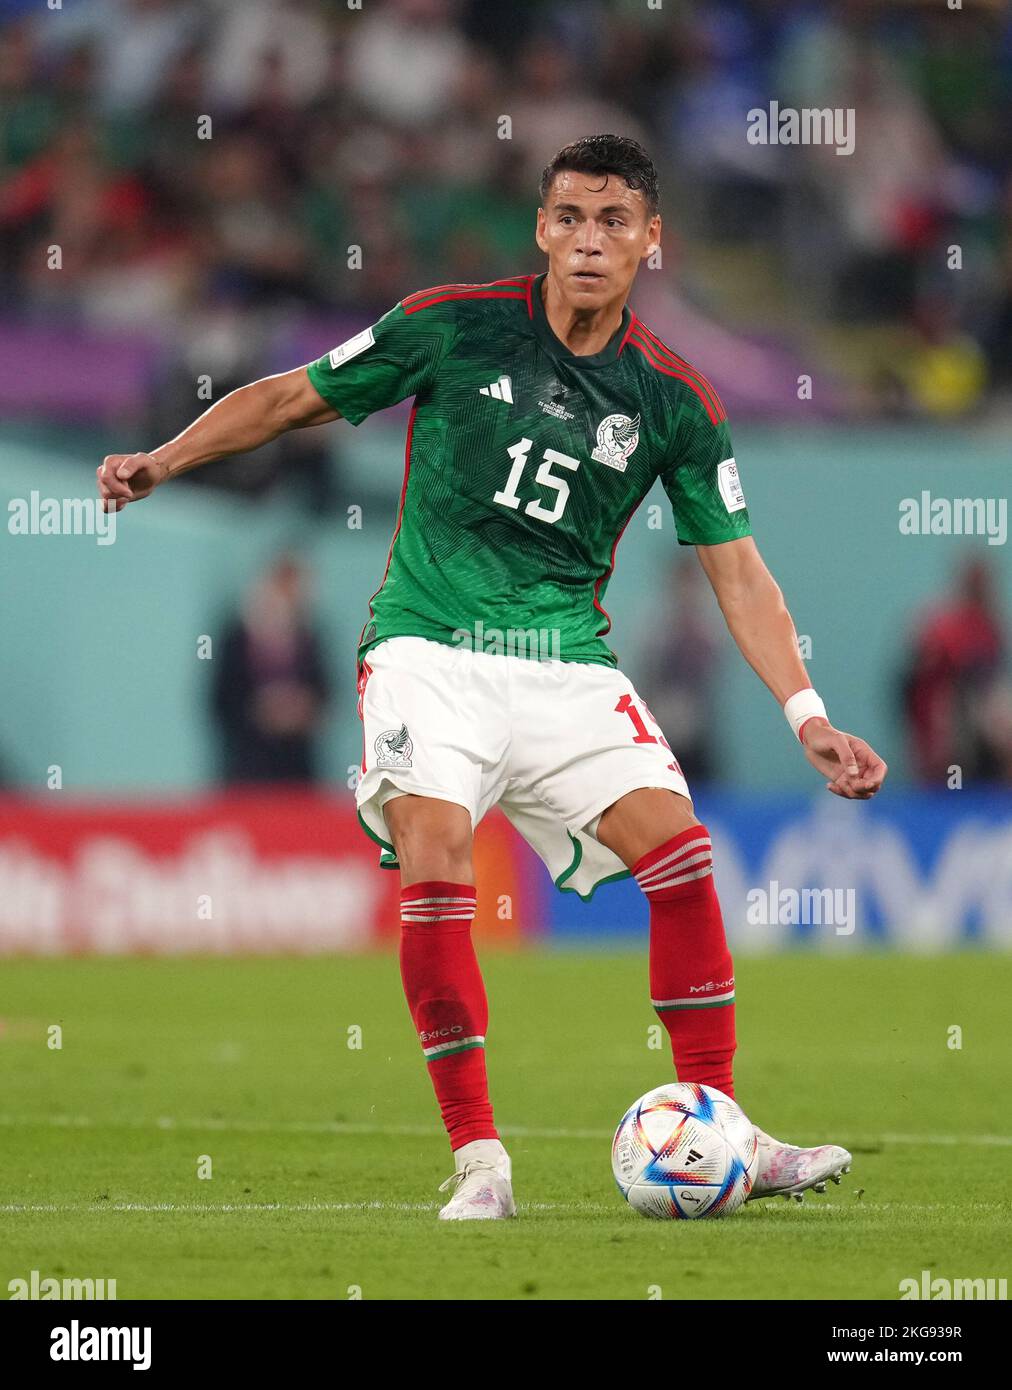 Mexico's Hector Moreno during the FIFA World Cup Group C match at Stadium 974, Rass Abou Aboud. Picture date: Tuesday November 22, 2022. Stock Photo